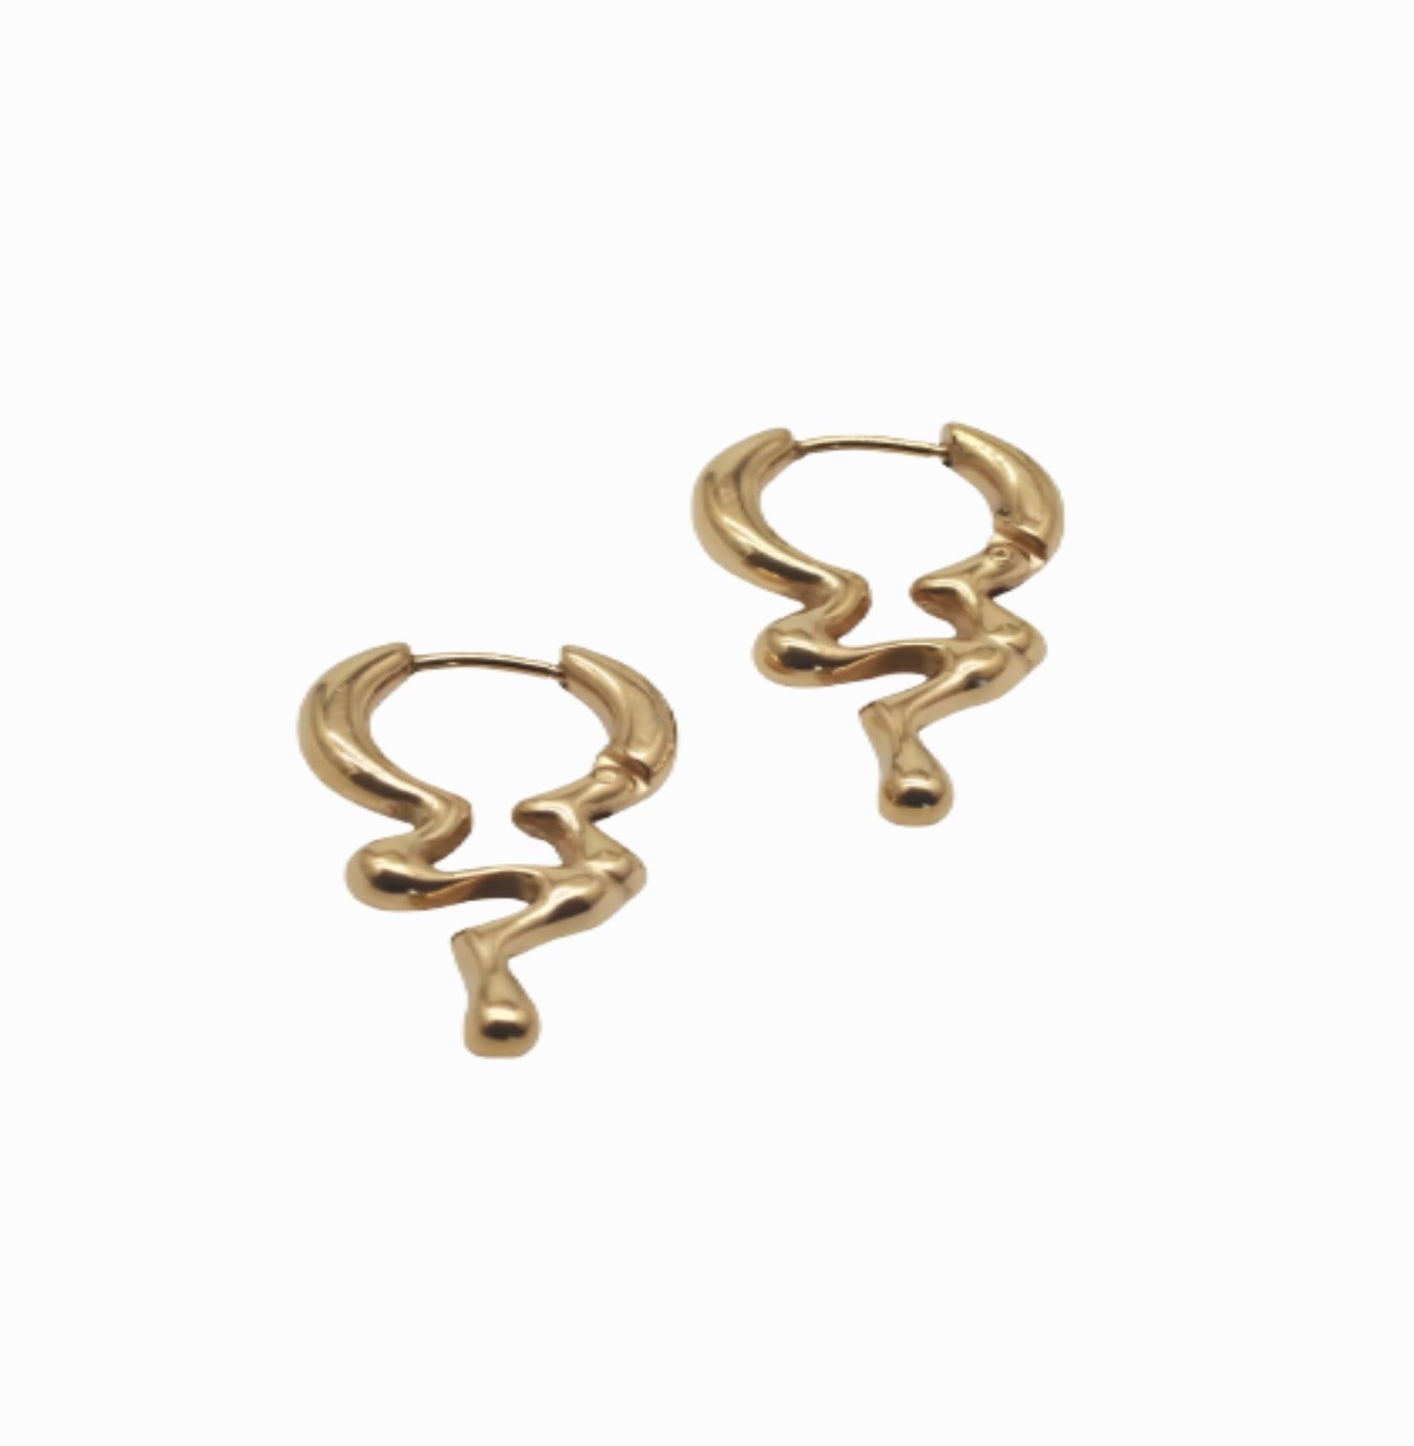 ALIO EARRINGS earing Yubama Jewelry Online Store - The Elegant Designs of Gold and Silver ! 